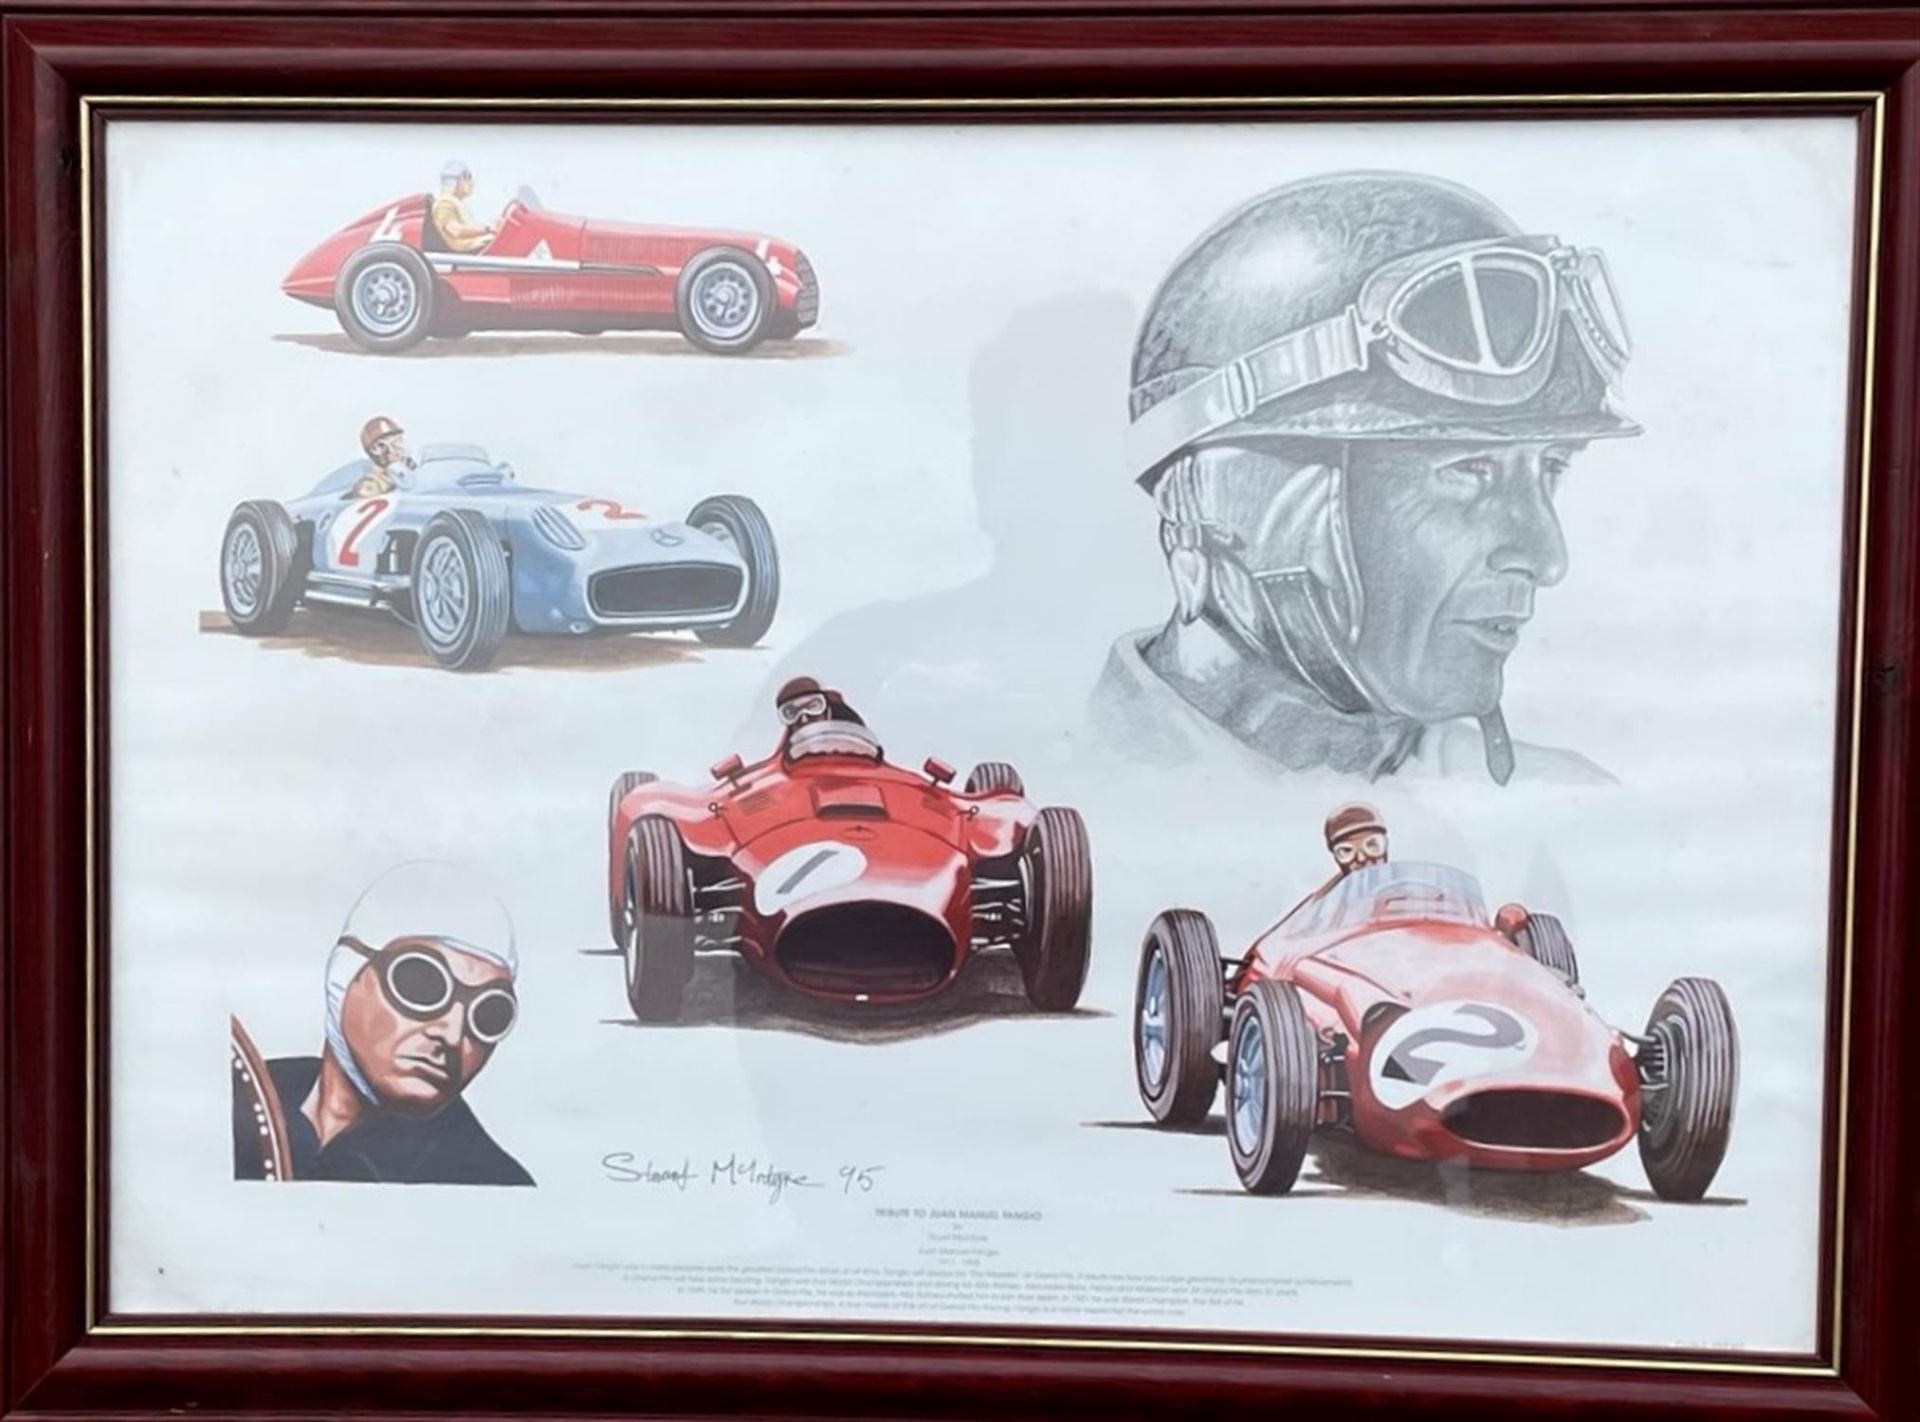 Tribute to Juan Manuel Fangio by Stuart McIntyre - Image 3 of 3